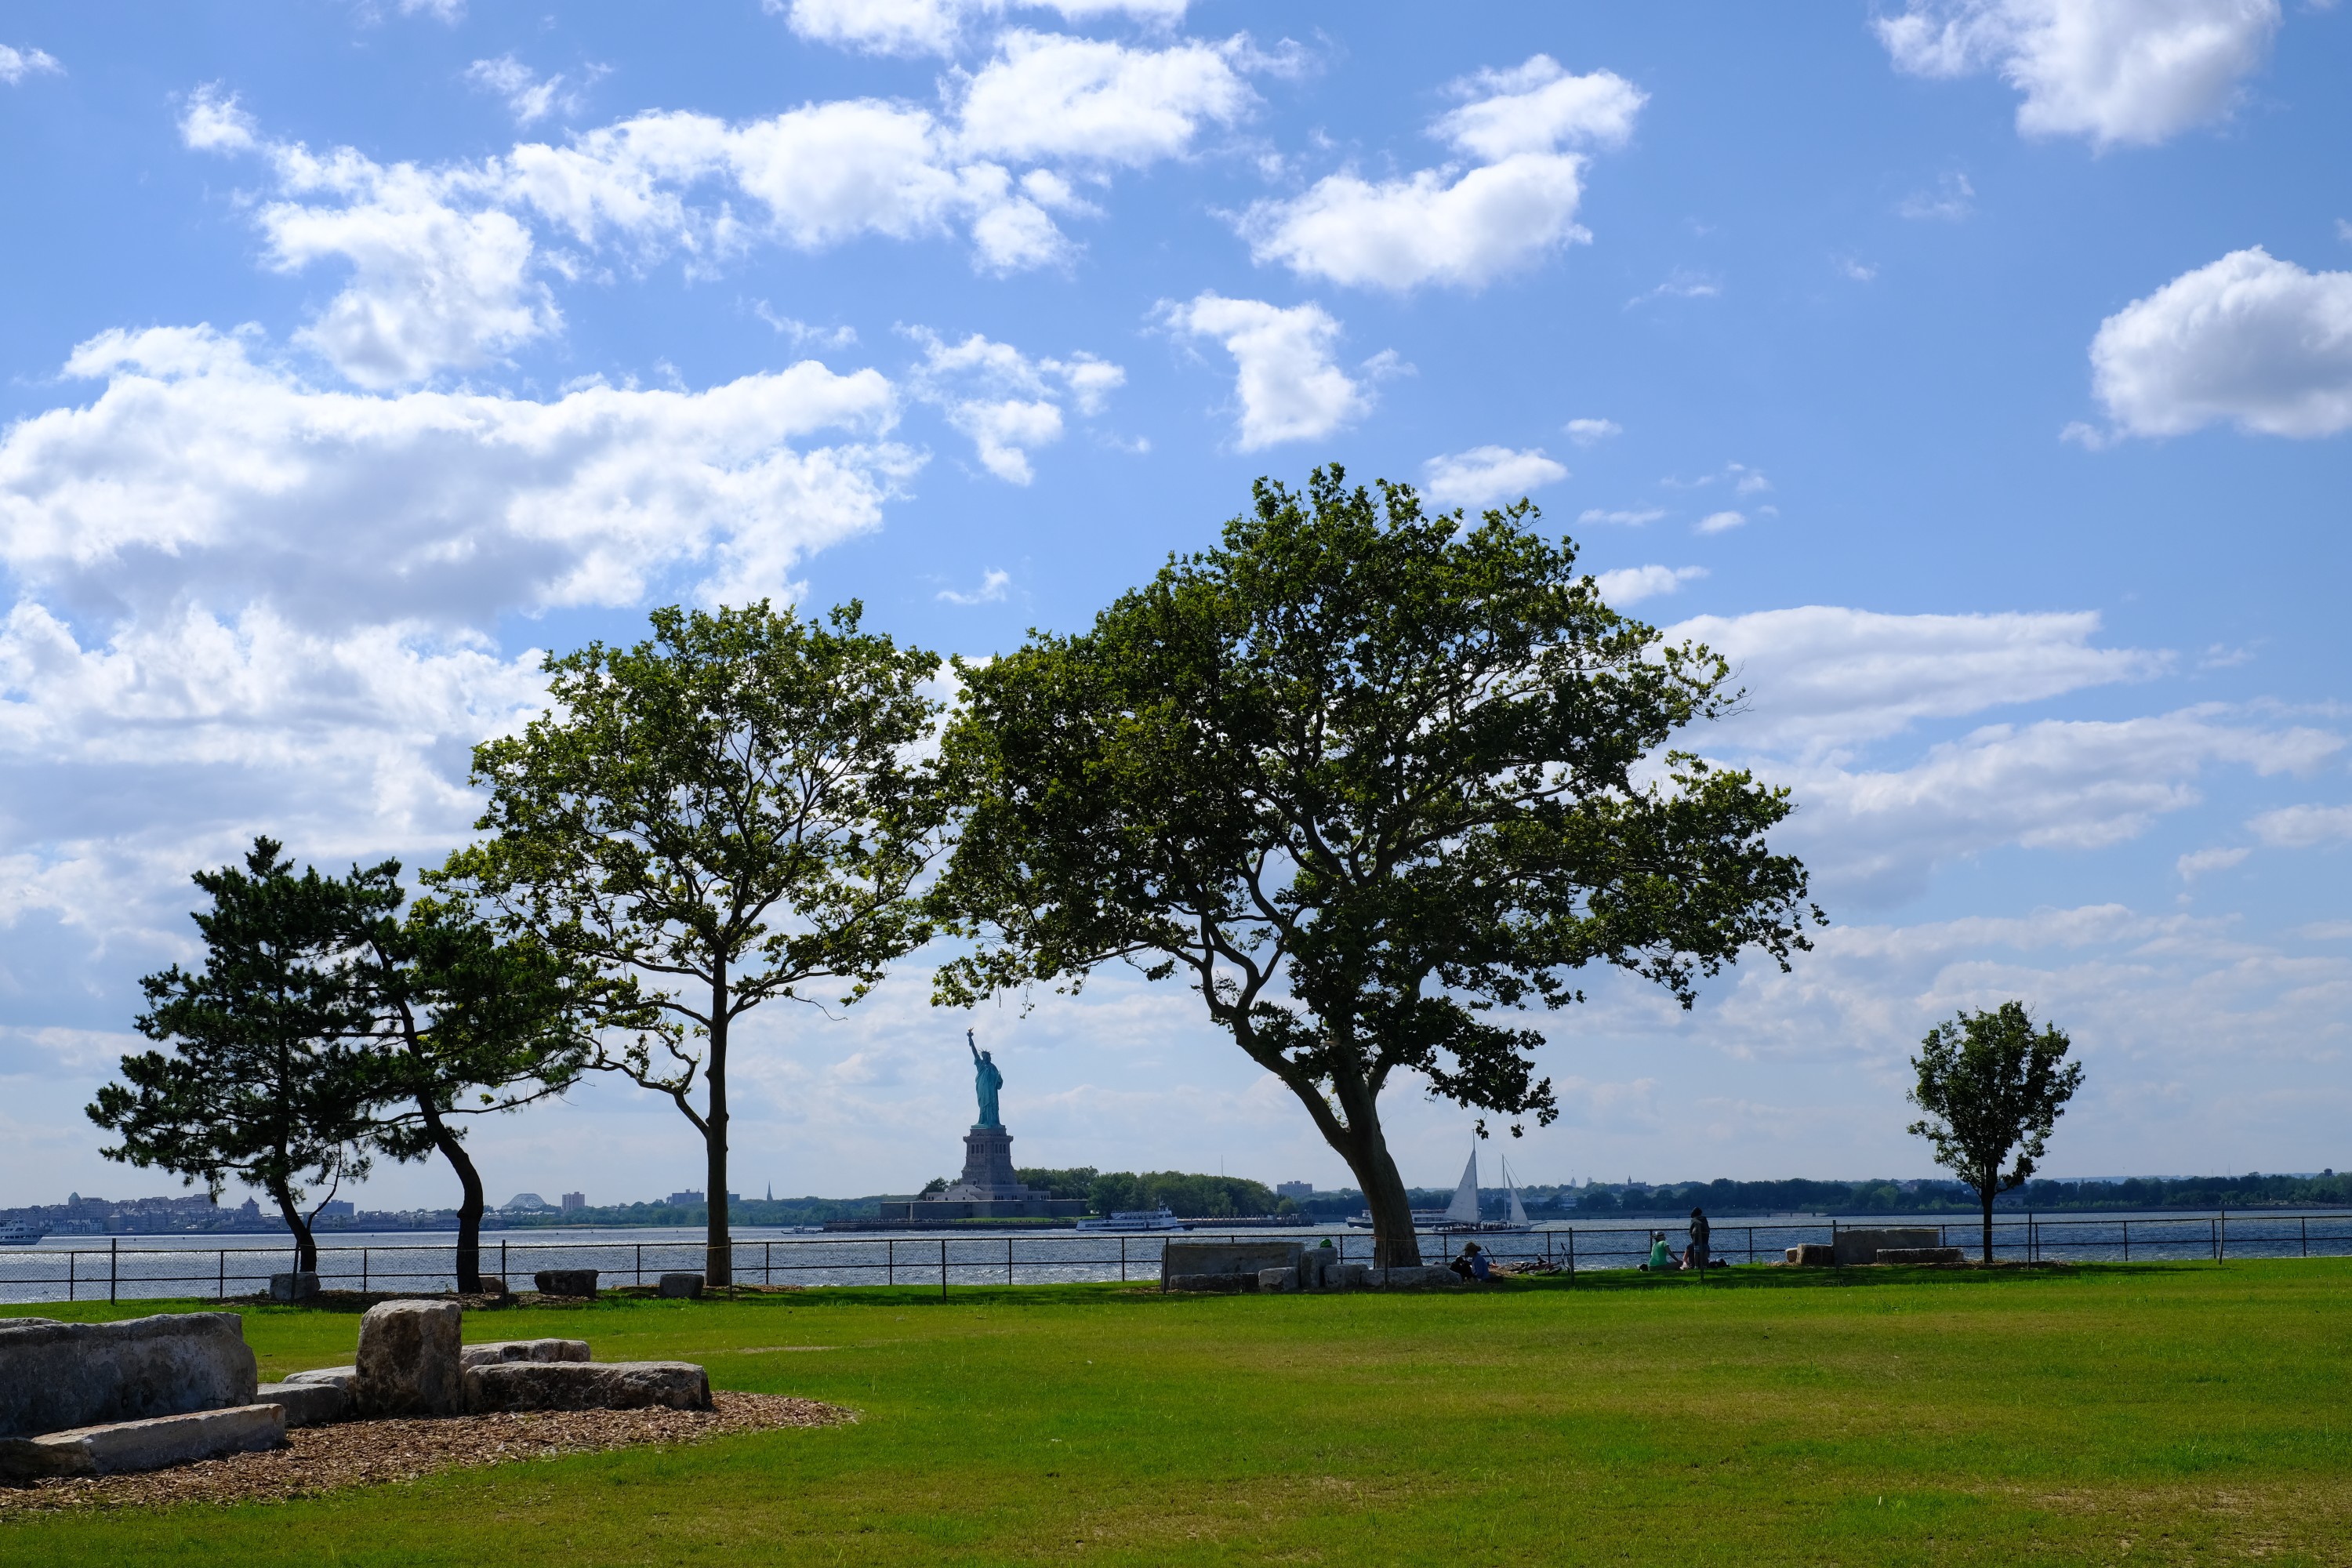 view of Statue of Liberty from Picnic Point